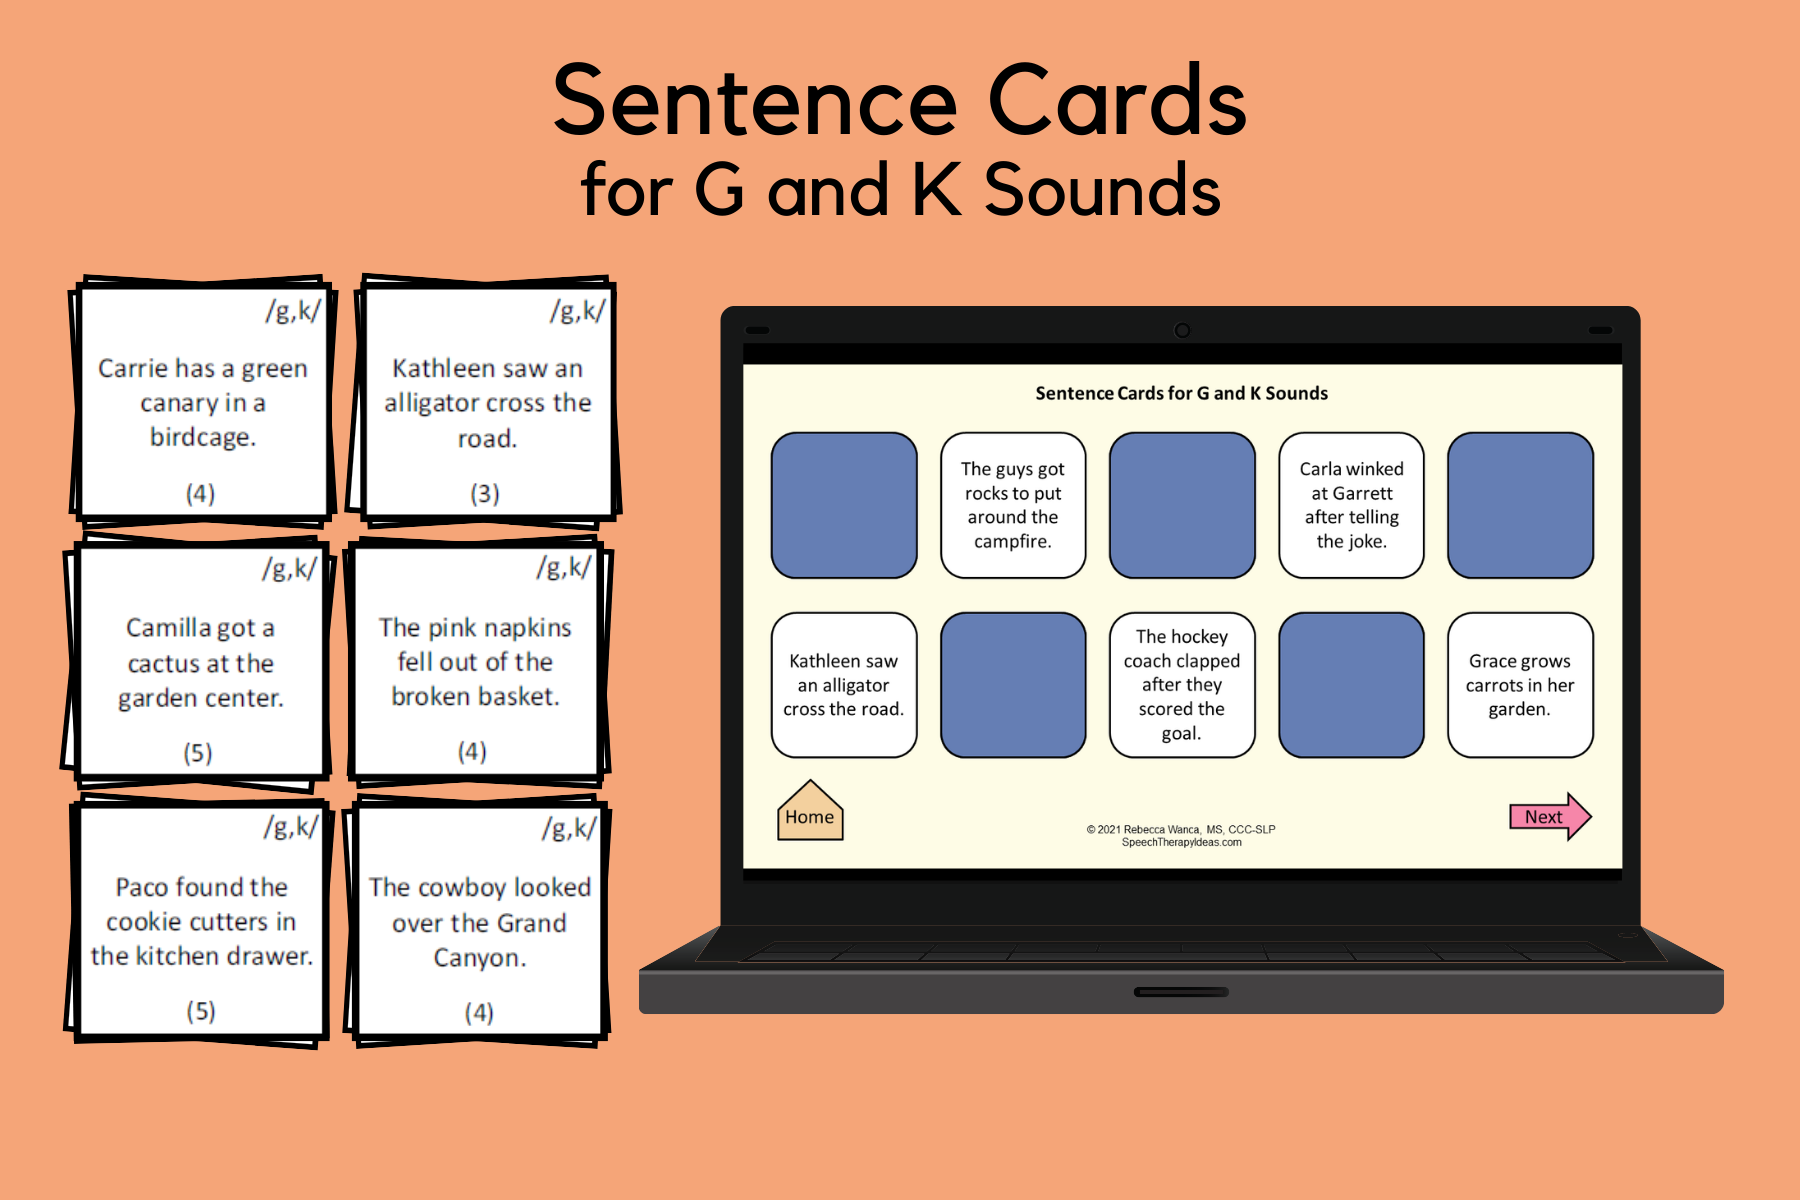 Sentence Cards for G and K Sounds